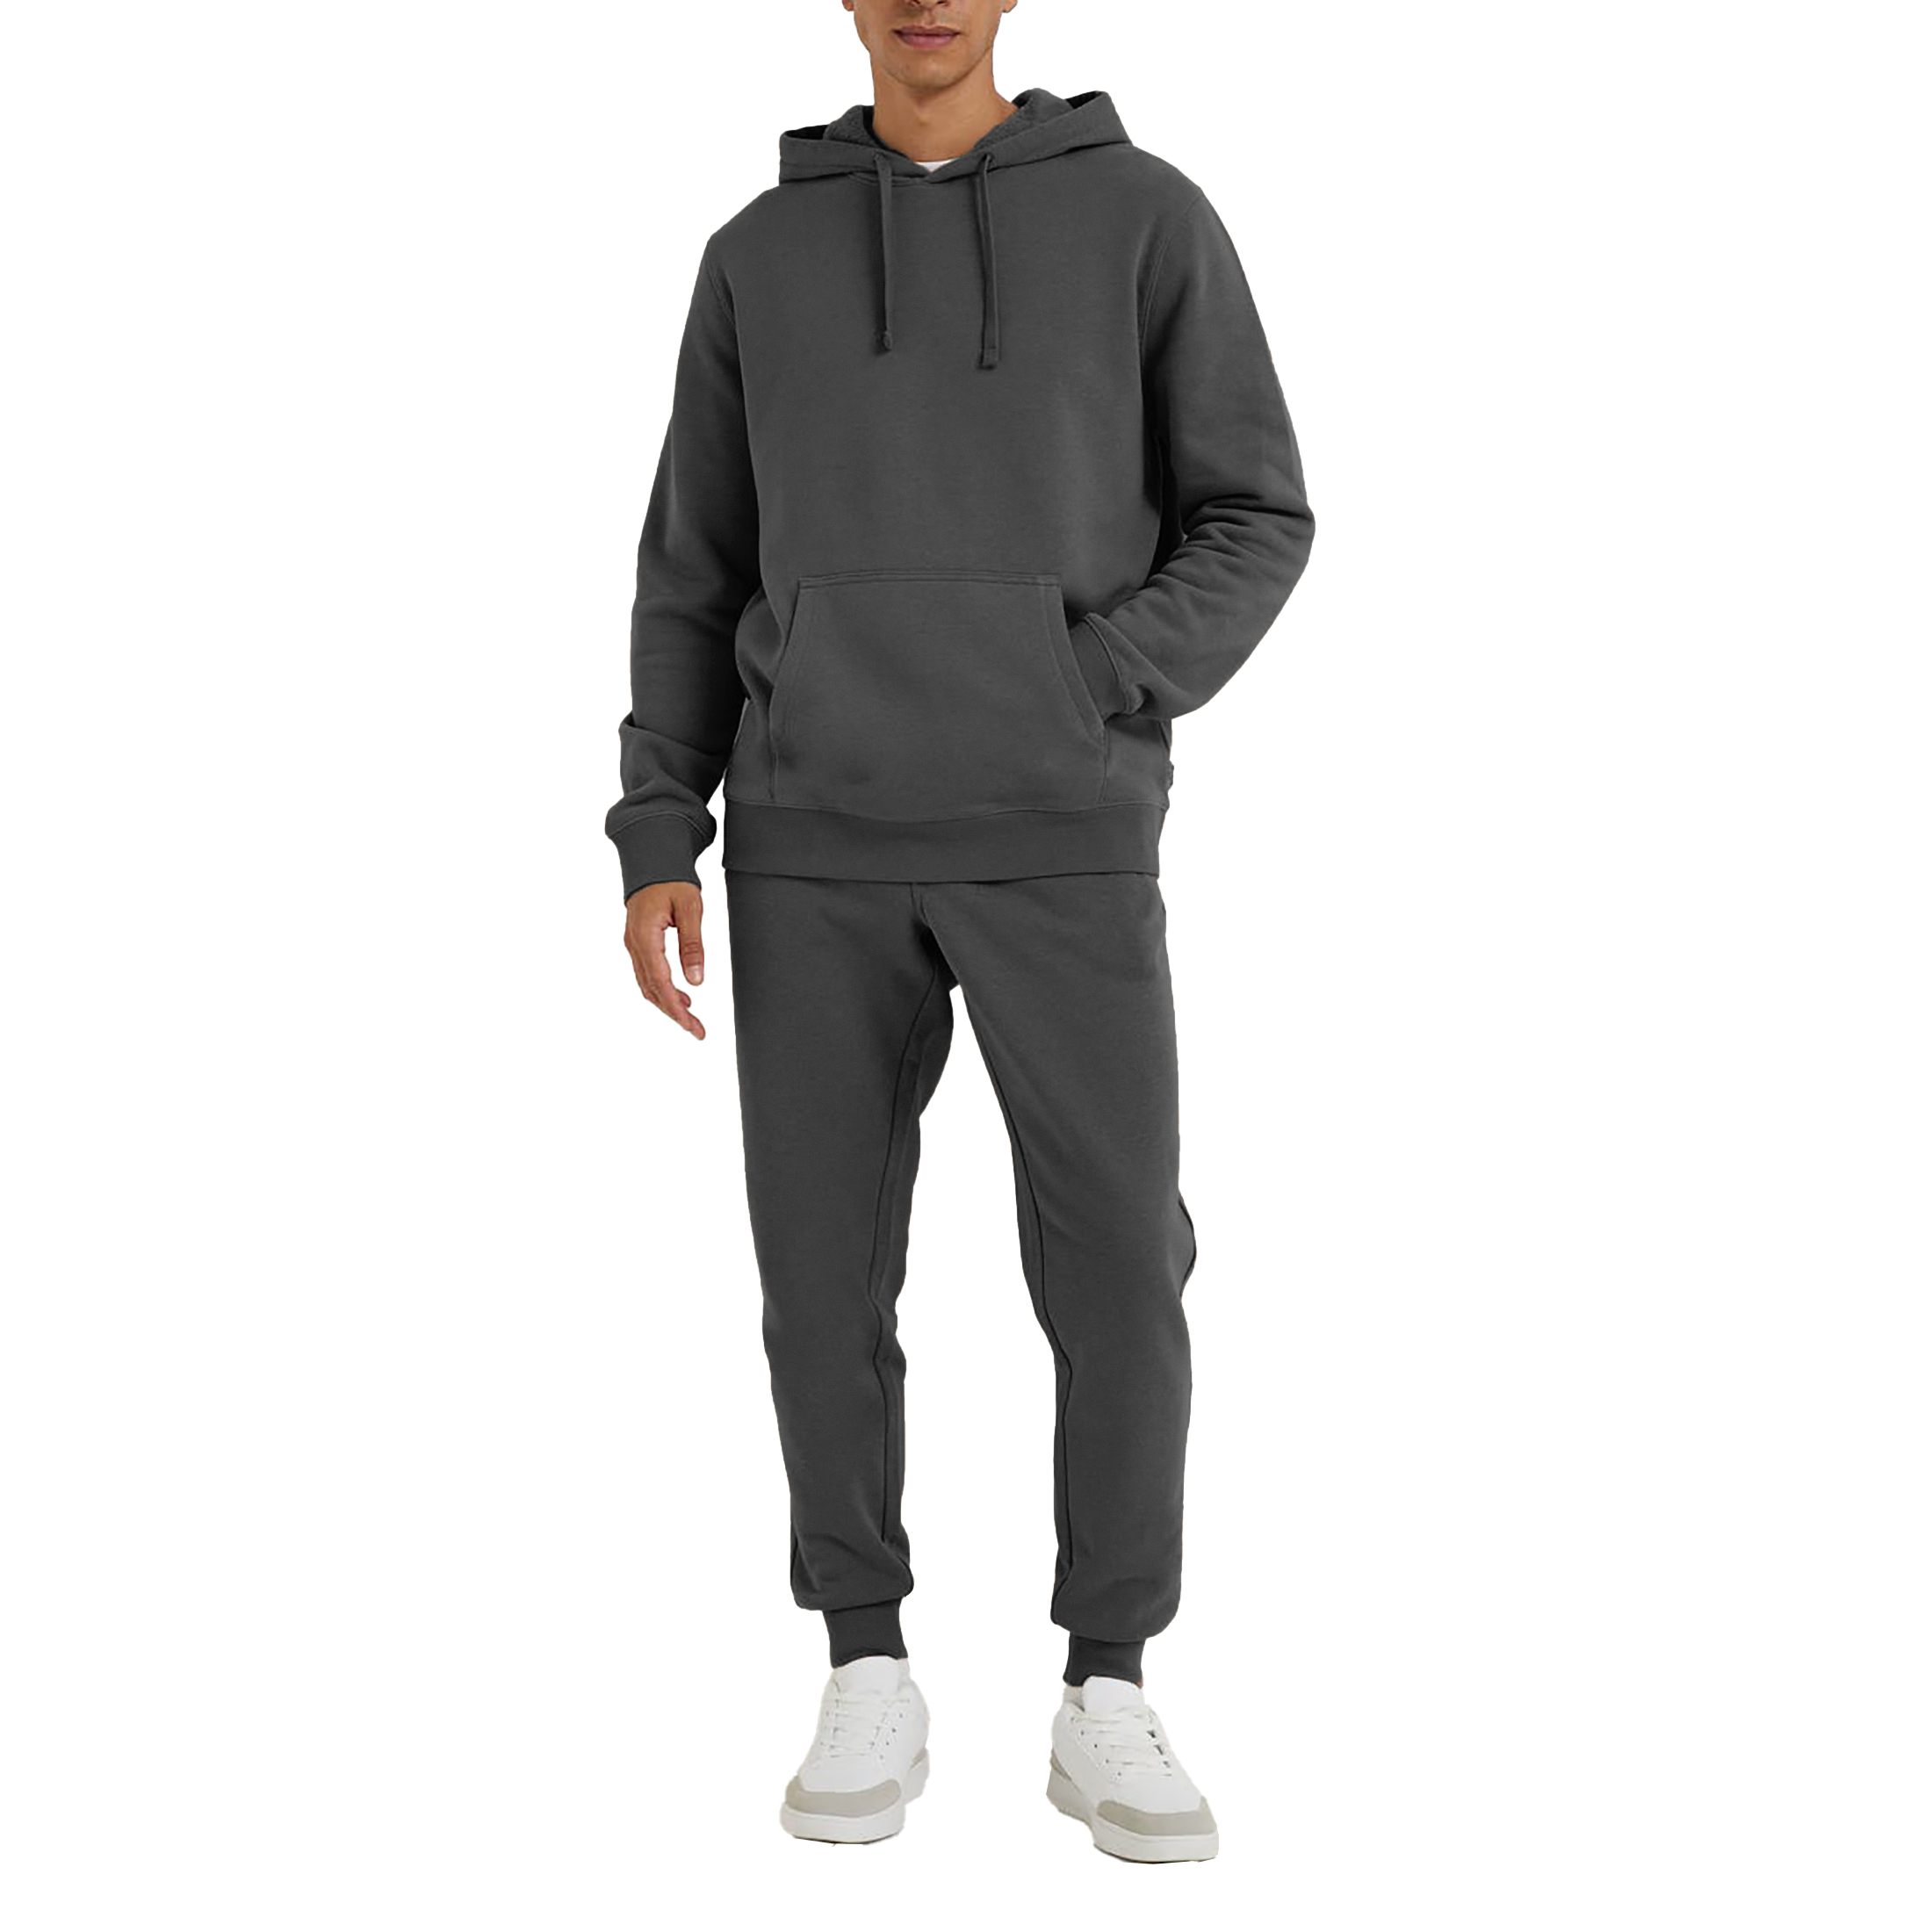 Men's Athletic Warm Jogging Pullover Active Tracksuit - Charcoal, 3X-Large